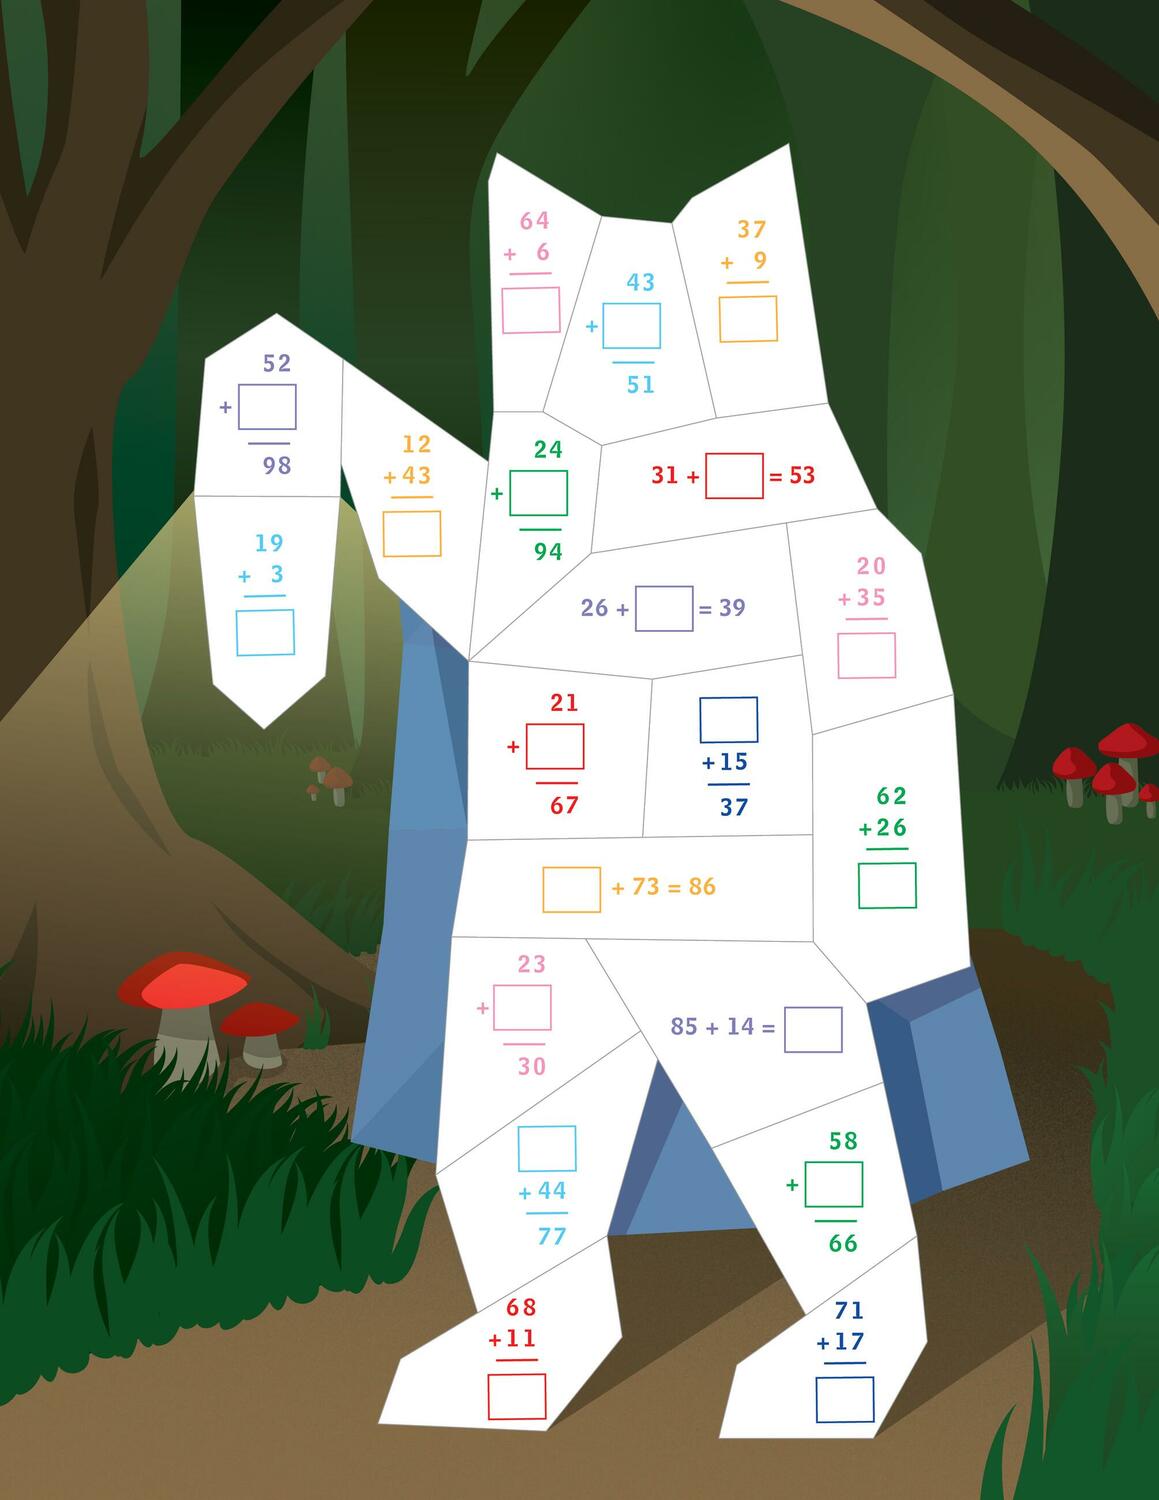 Learn by Sticker: More Addition & Subtraction: Use Math to Create 10 Fantasy Animals!